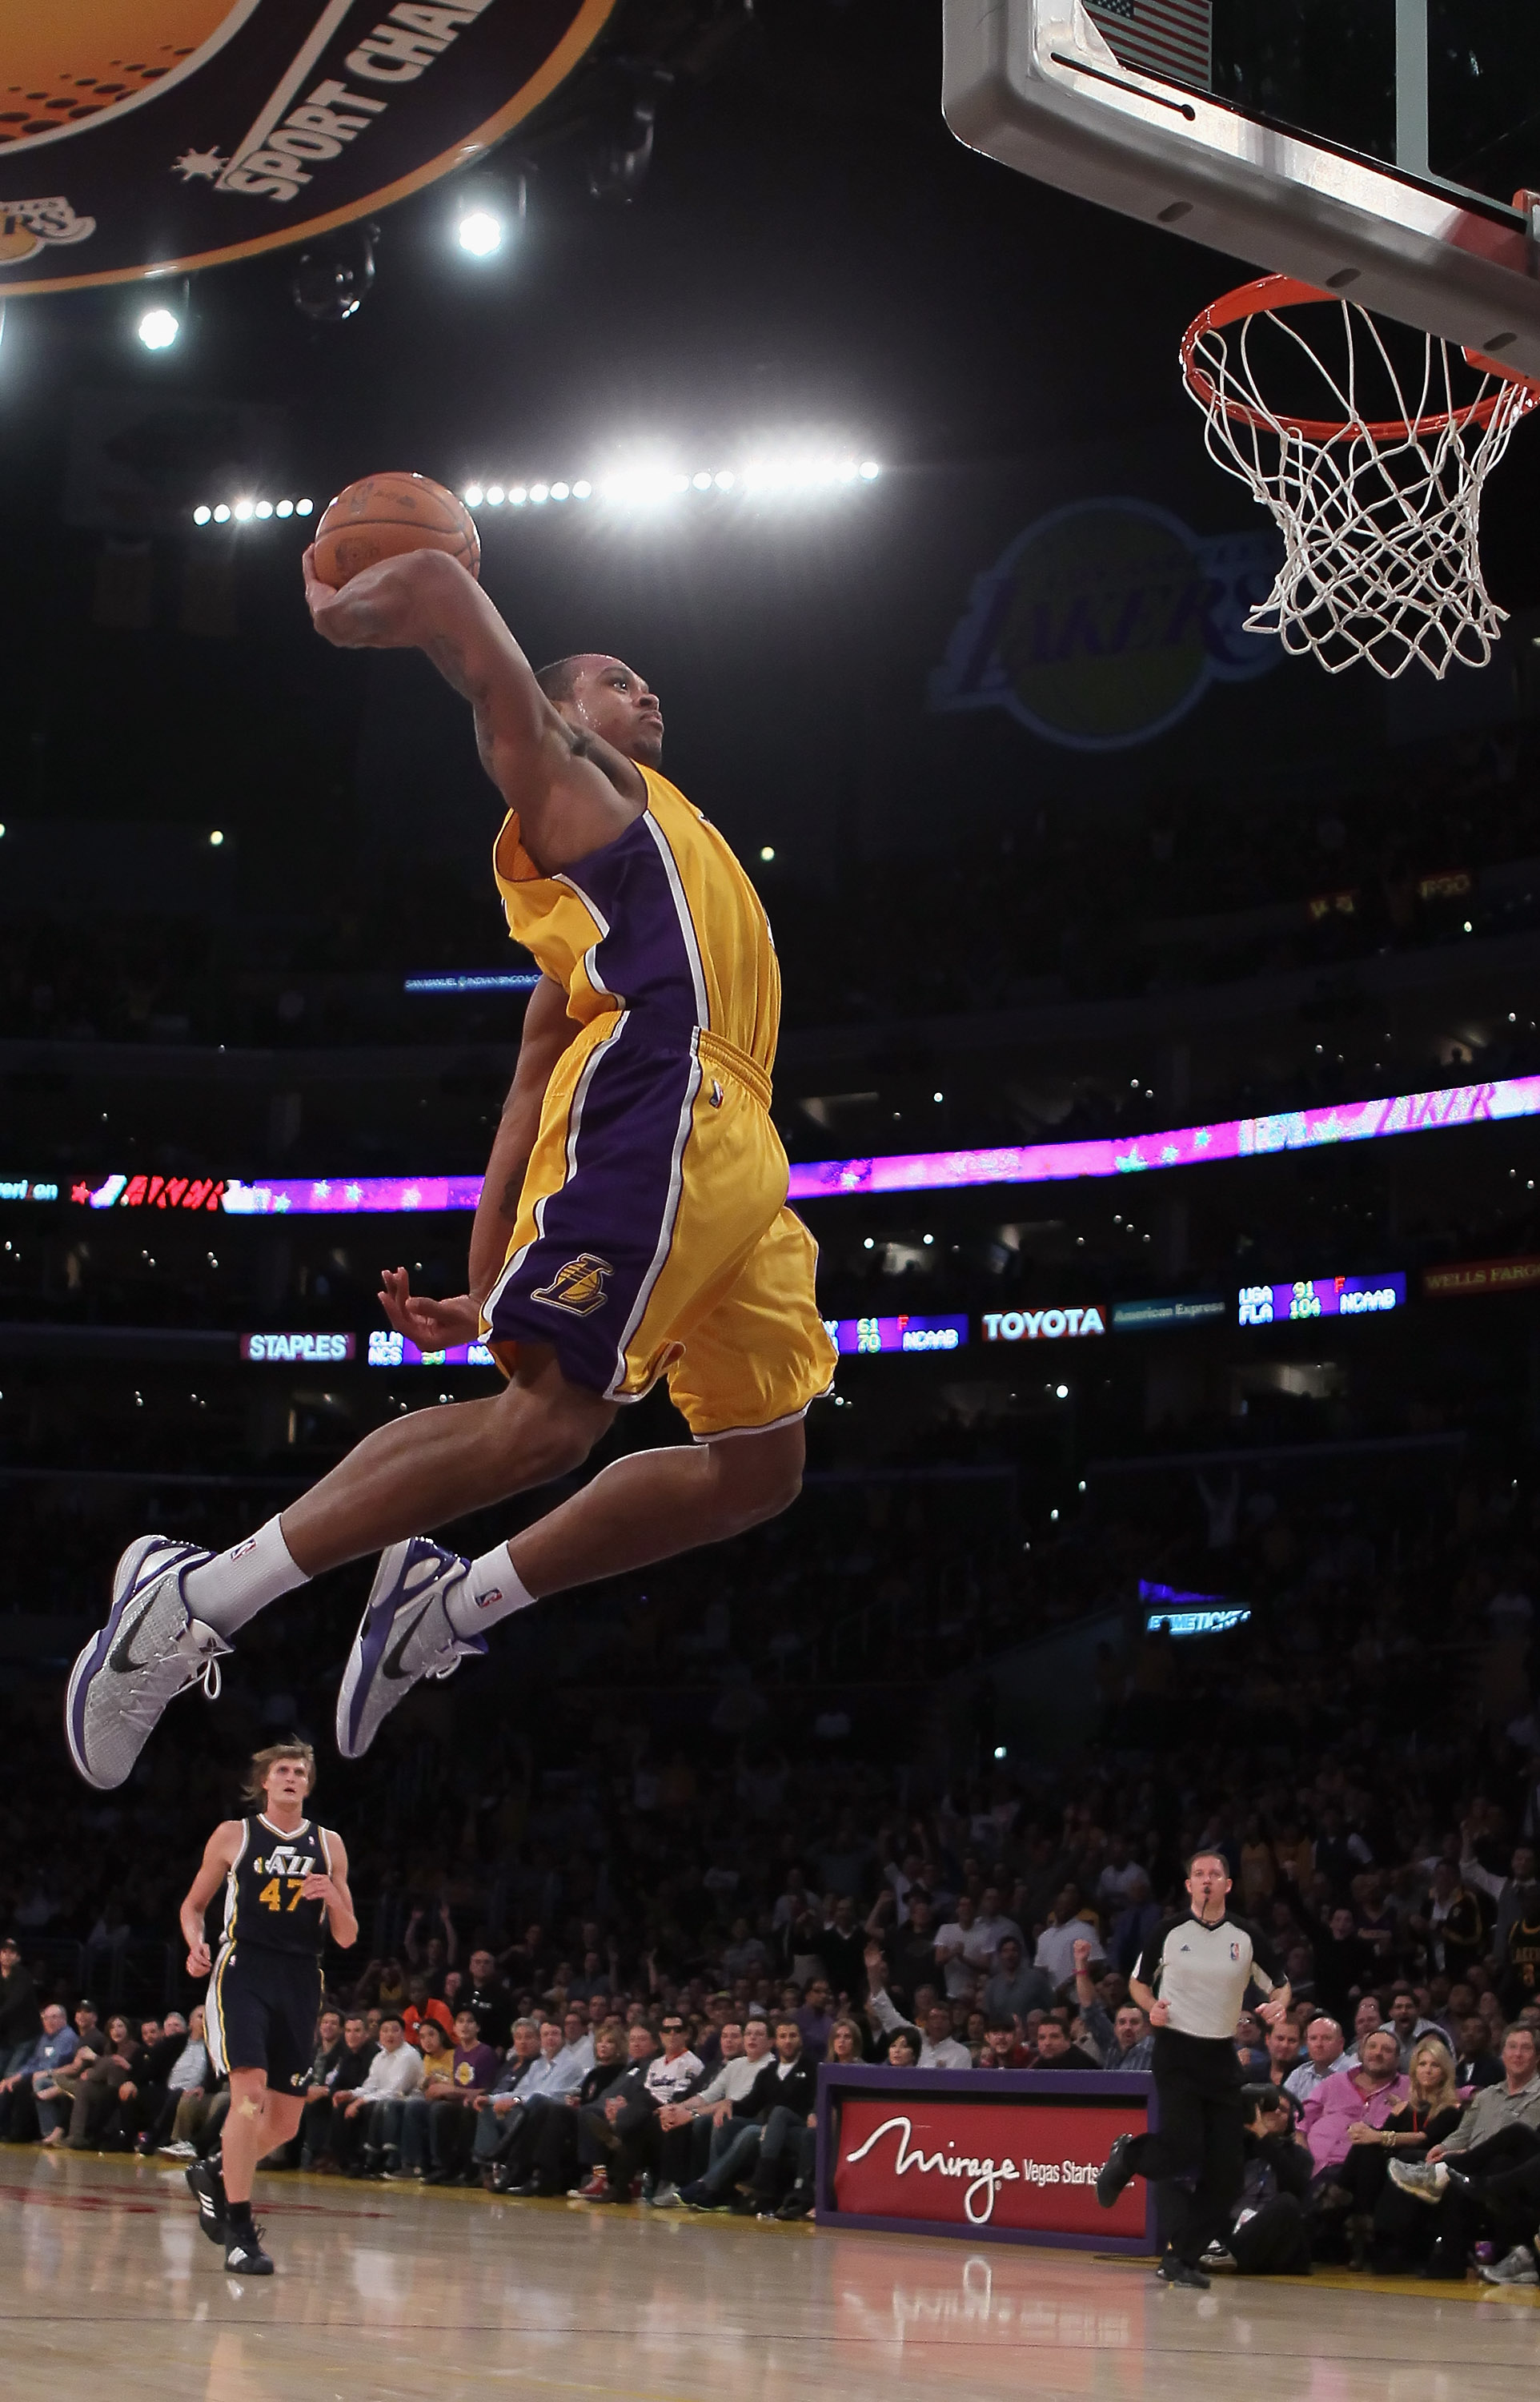 LOS ANGELES, CA - JANUARY 25:  Shannon Brown #12 of the Los Angeles Lakers goes up for a dunk against the Utah Jazz in the second half at Staples Center on January 25, 2011 in Los Angeles, California. The Lakers defeated the Jazz 120-91. NOTE TO USER: Use